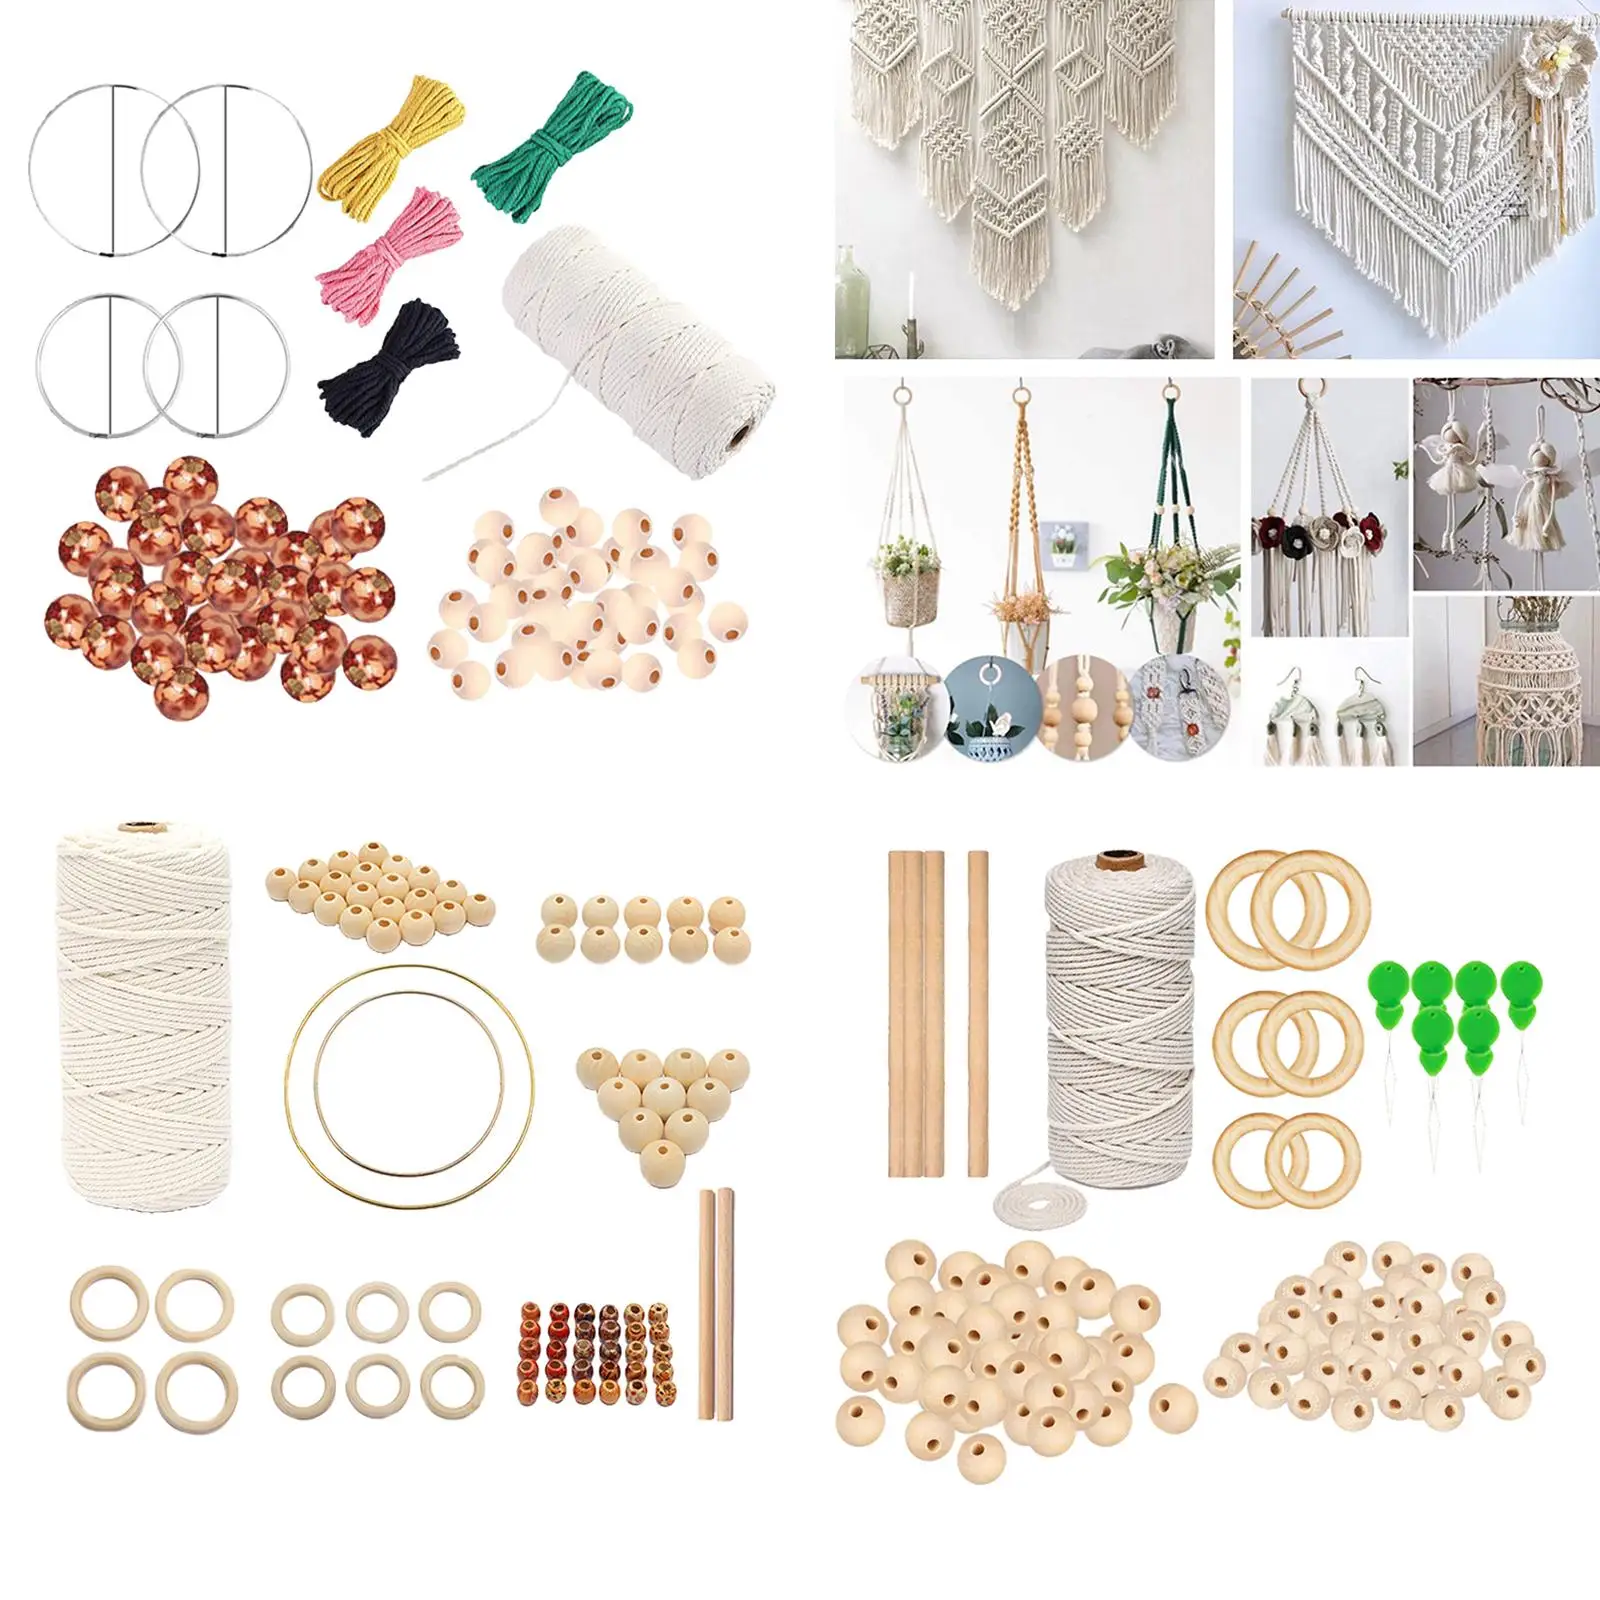 DIY Macrame Cord Kit Natural Cotton Twisred Rope Bead for Wall Hanging Craft